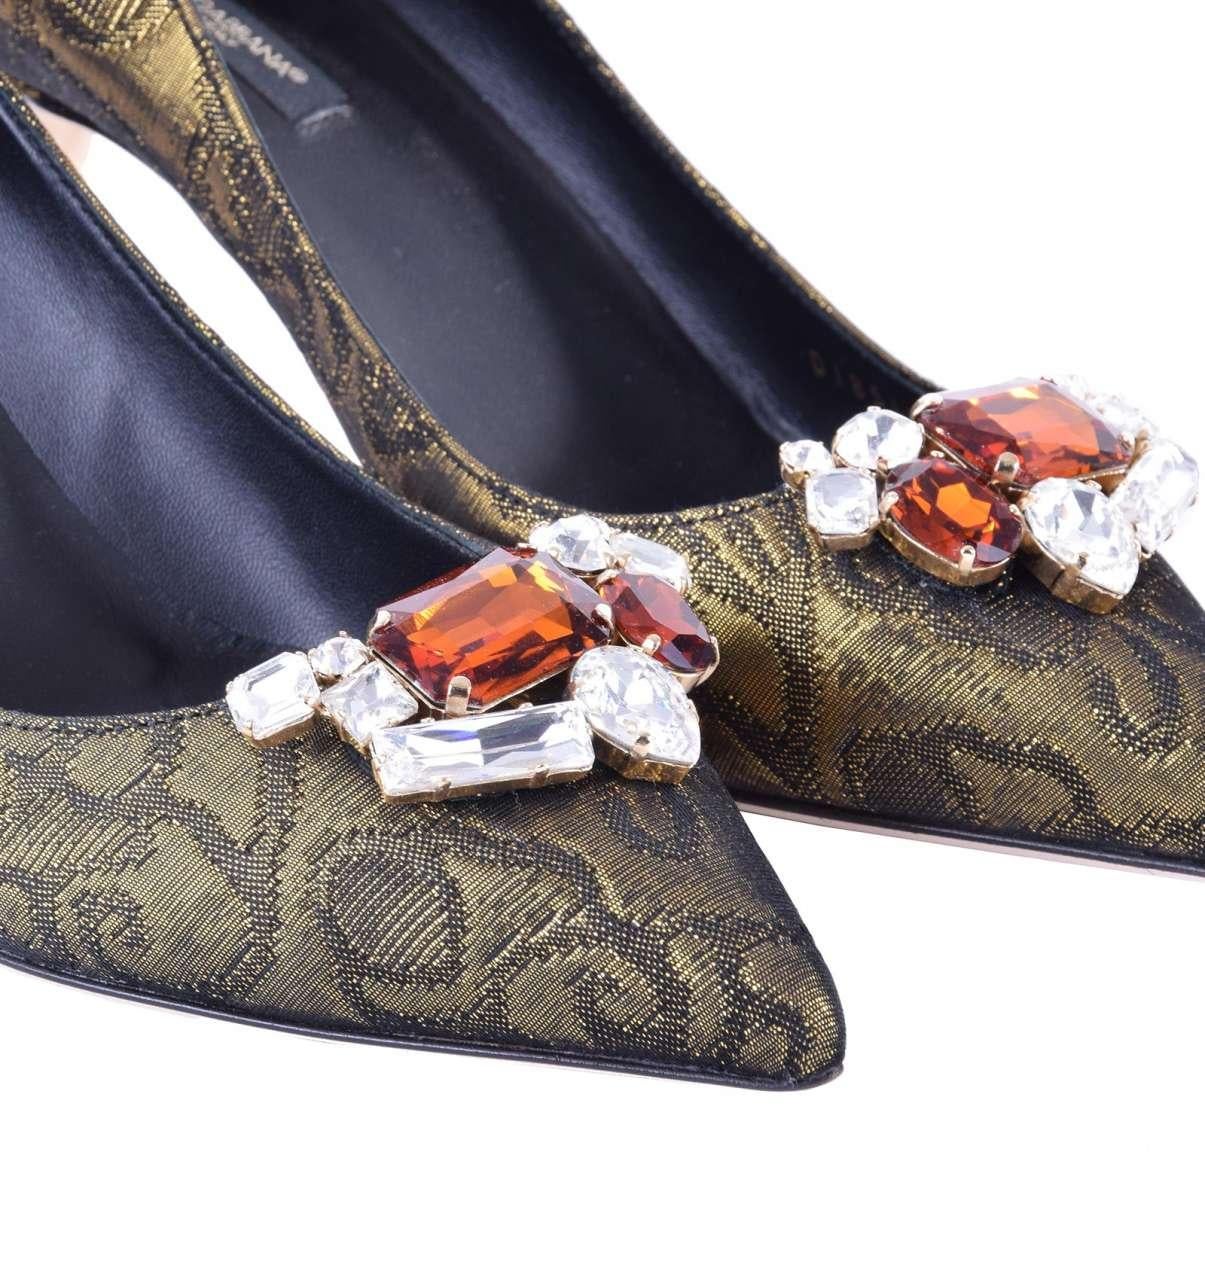 - Brocade Pumps BELLUCCI embellished with crystal brooch by DOLCE & GABBANA Black Label - MADE IN ITALY - New with Box - Former RRP: EUR 492 - Model: C18560-B9573-S8352 - Material: 49% Acetat, 46% Baumwolle, 5% Polyester - Sole: Leather - Color: